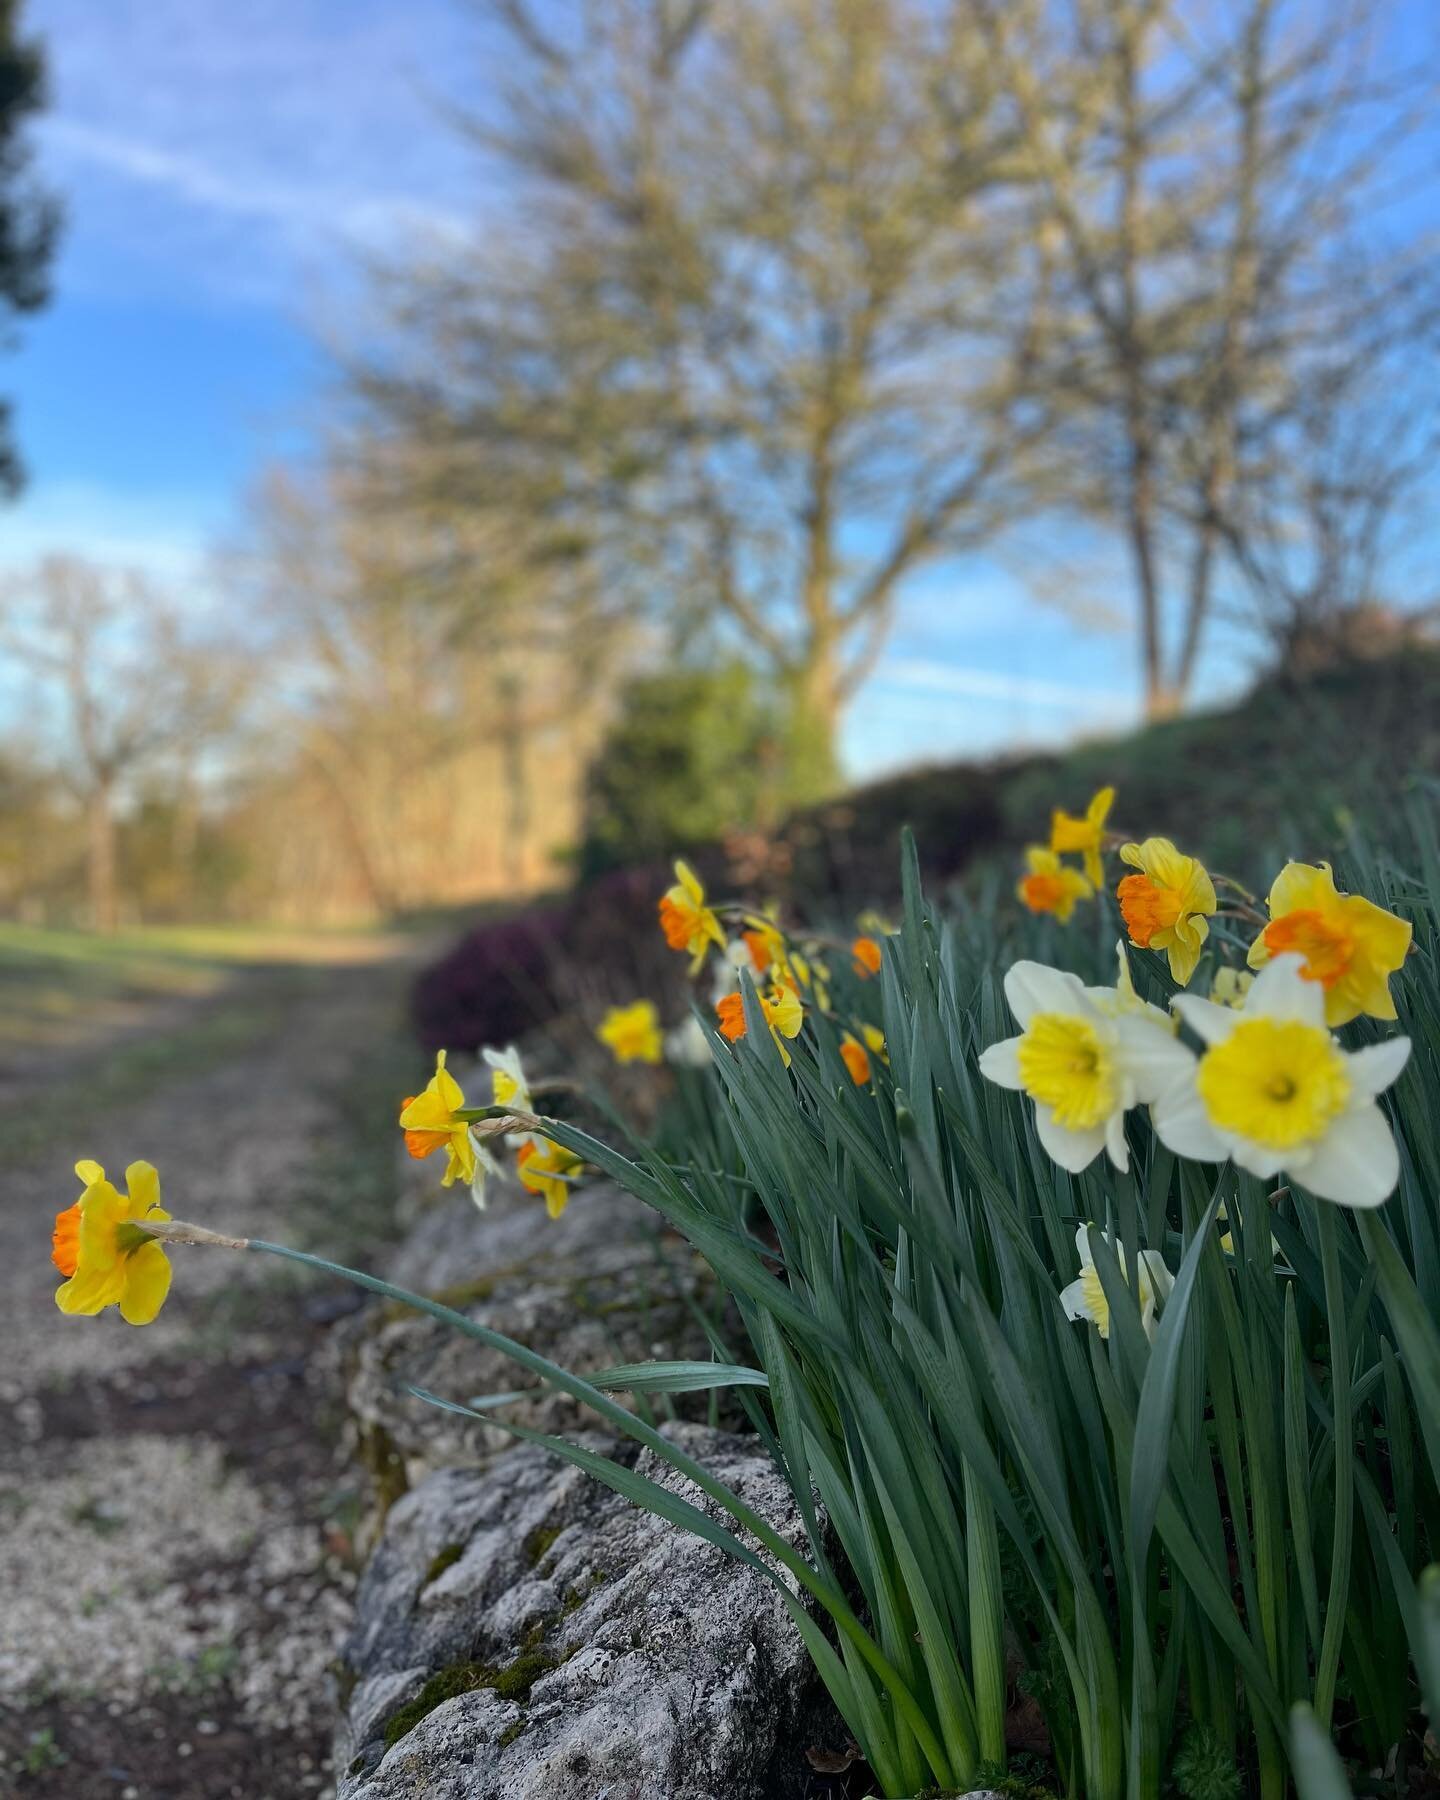 After a week of rain and storms, sunshine is back 🌸☀️ #springiscoming #daffodils #wildflowers